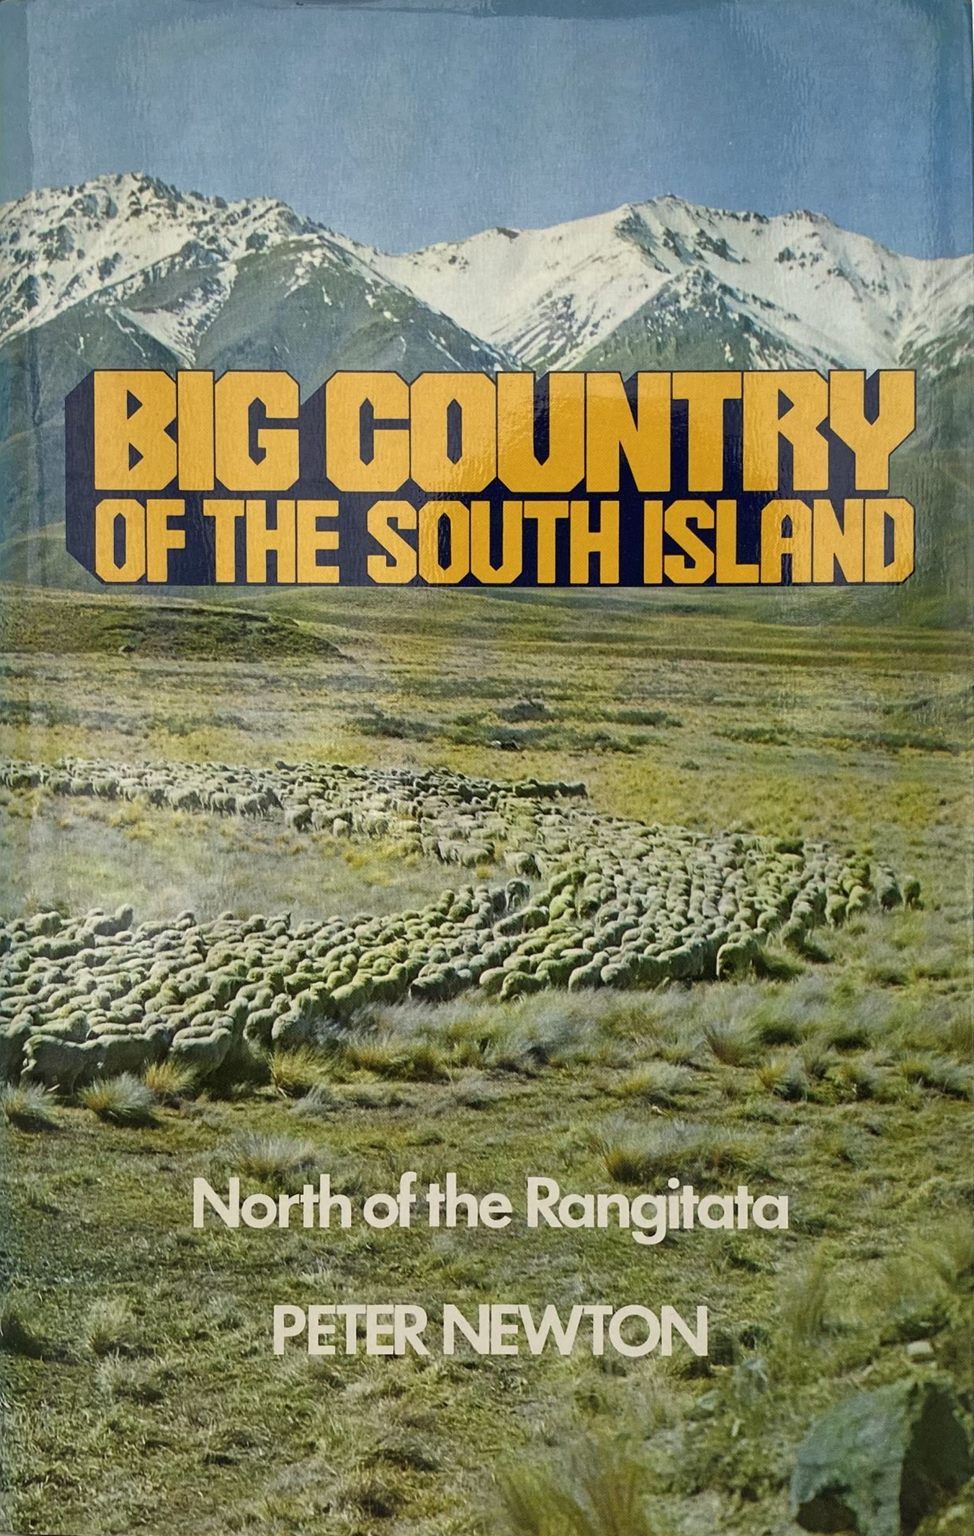 BIG COUNTRY OF THE SOUTH ISLAND: North of the Rangitata